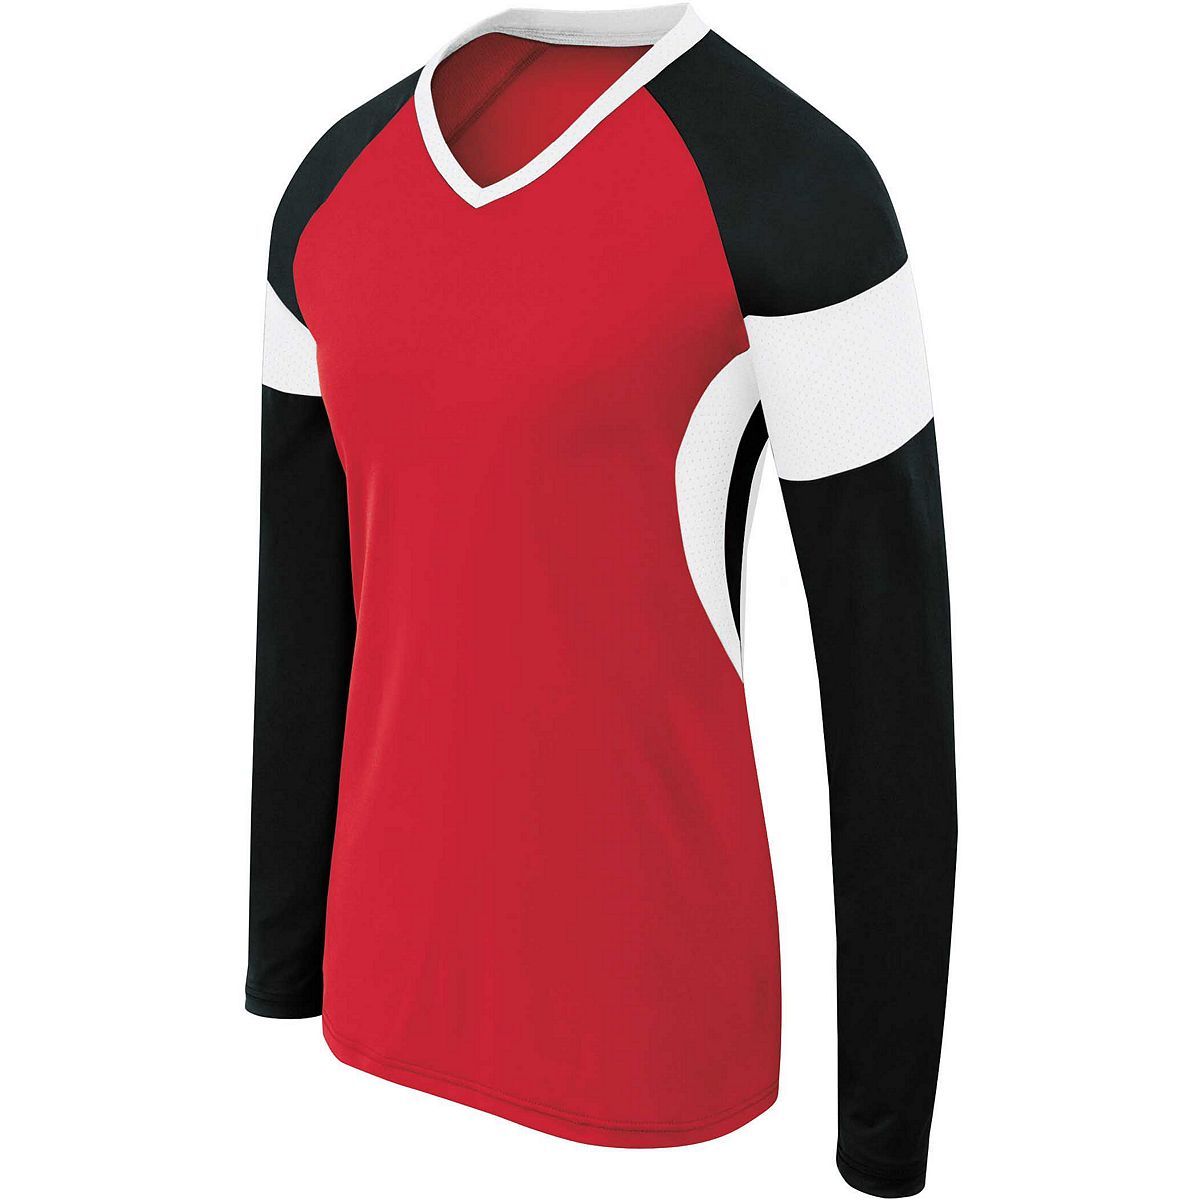 High 5 Girls Long Sleeve Raptor Jersey in Scarlet/Black/White  -Part of the Girls, High5-Products, Volleyball, Girls-Jersey, Shirts product lines at KanaleyCreations.com